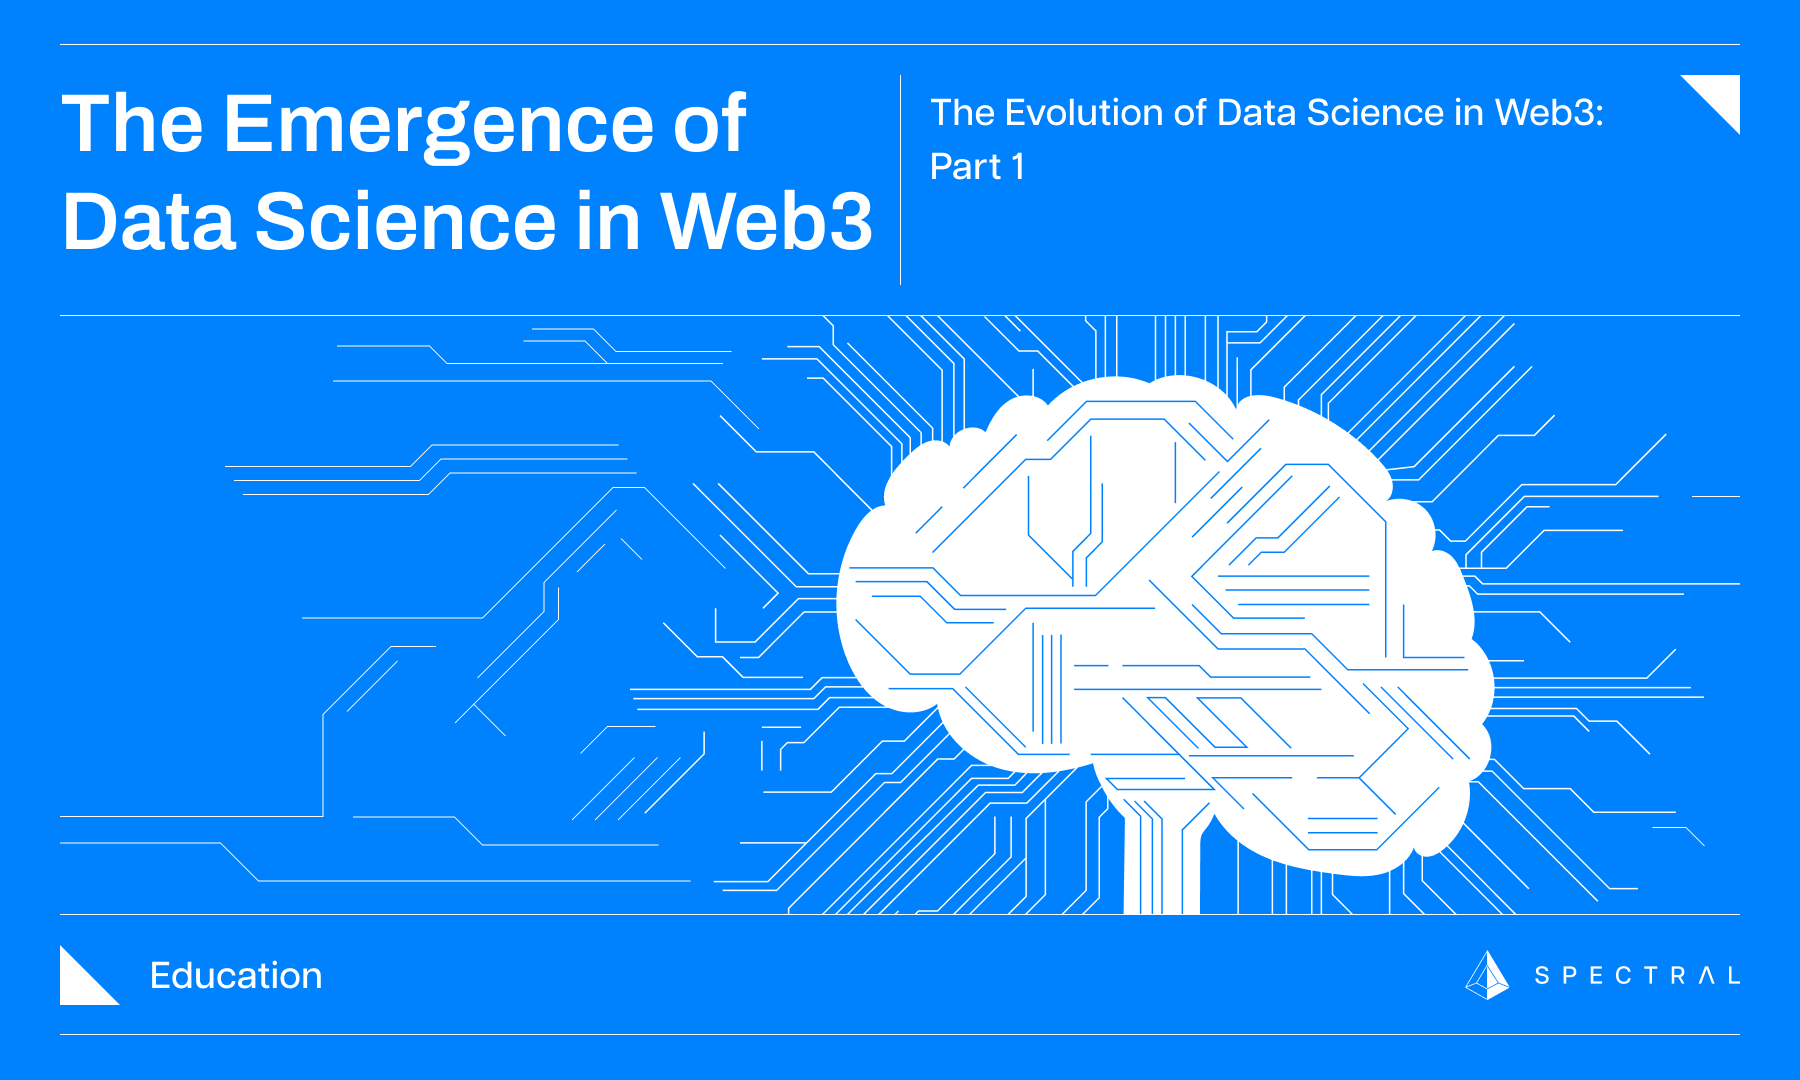 The Emergence of Data Science in Web3